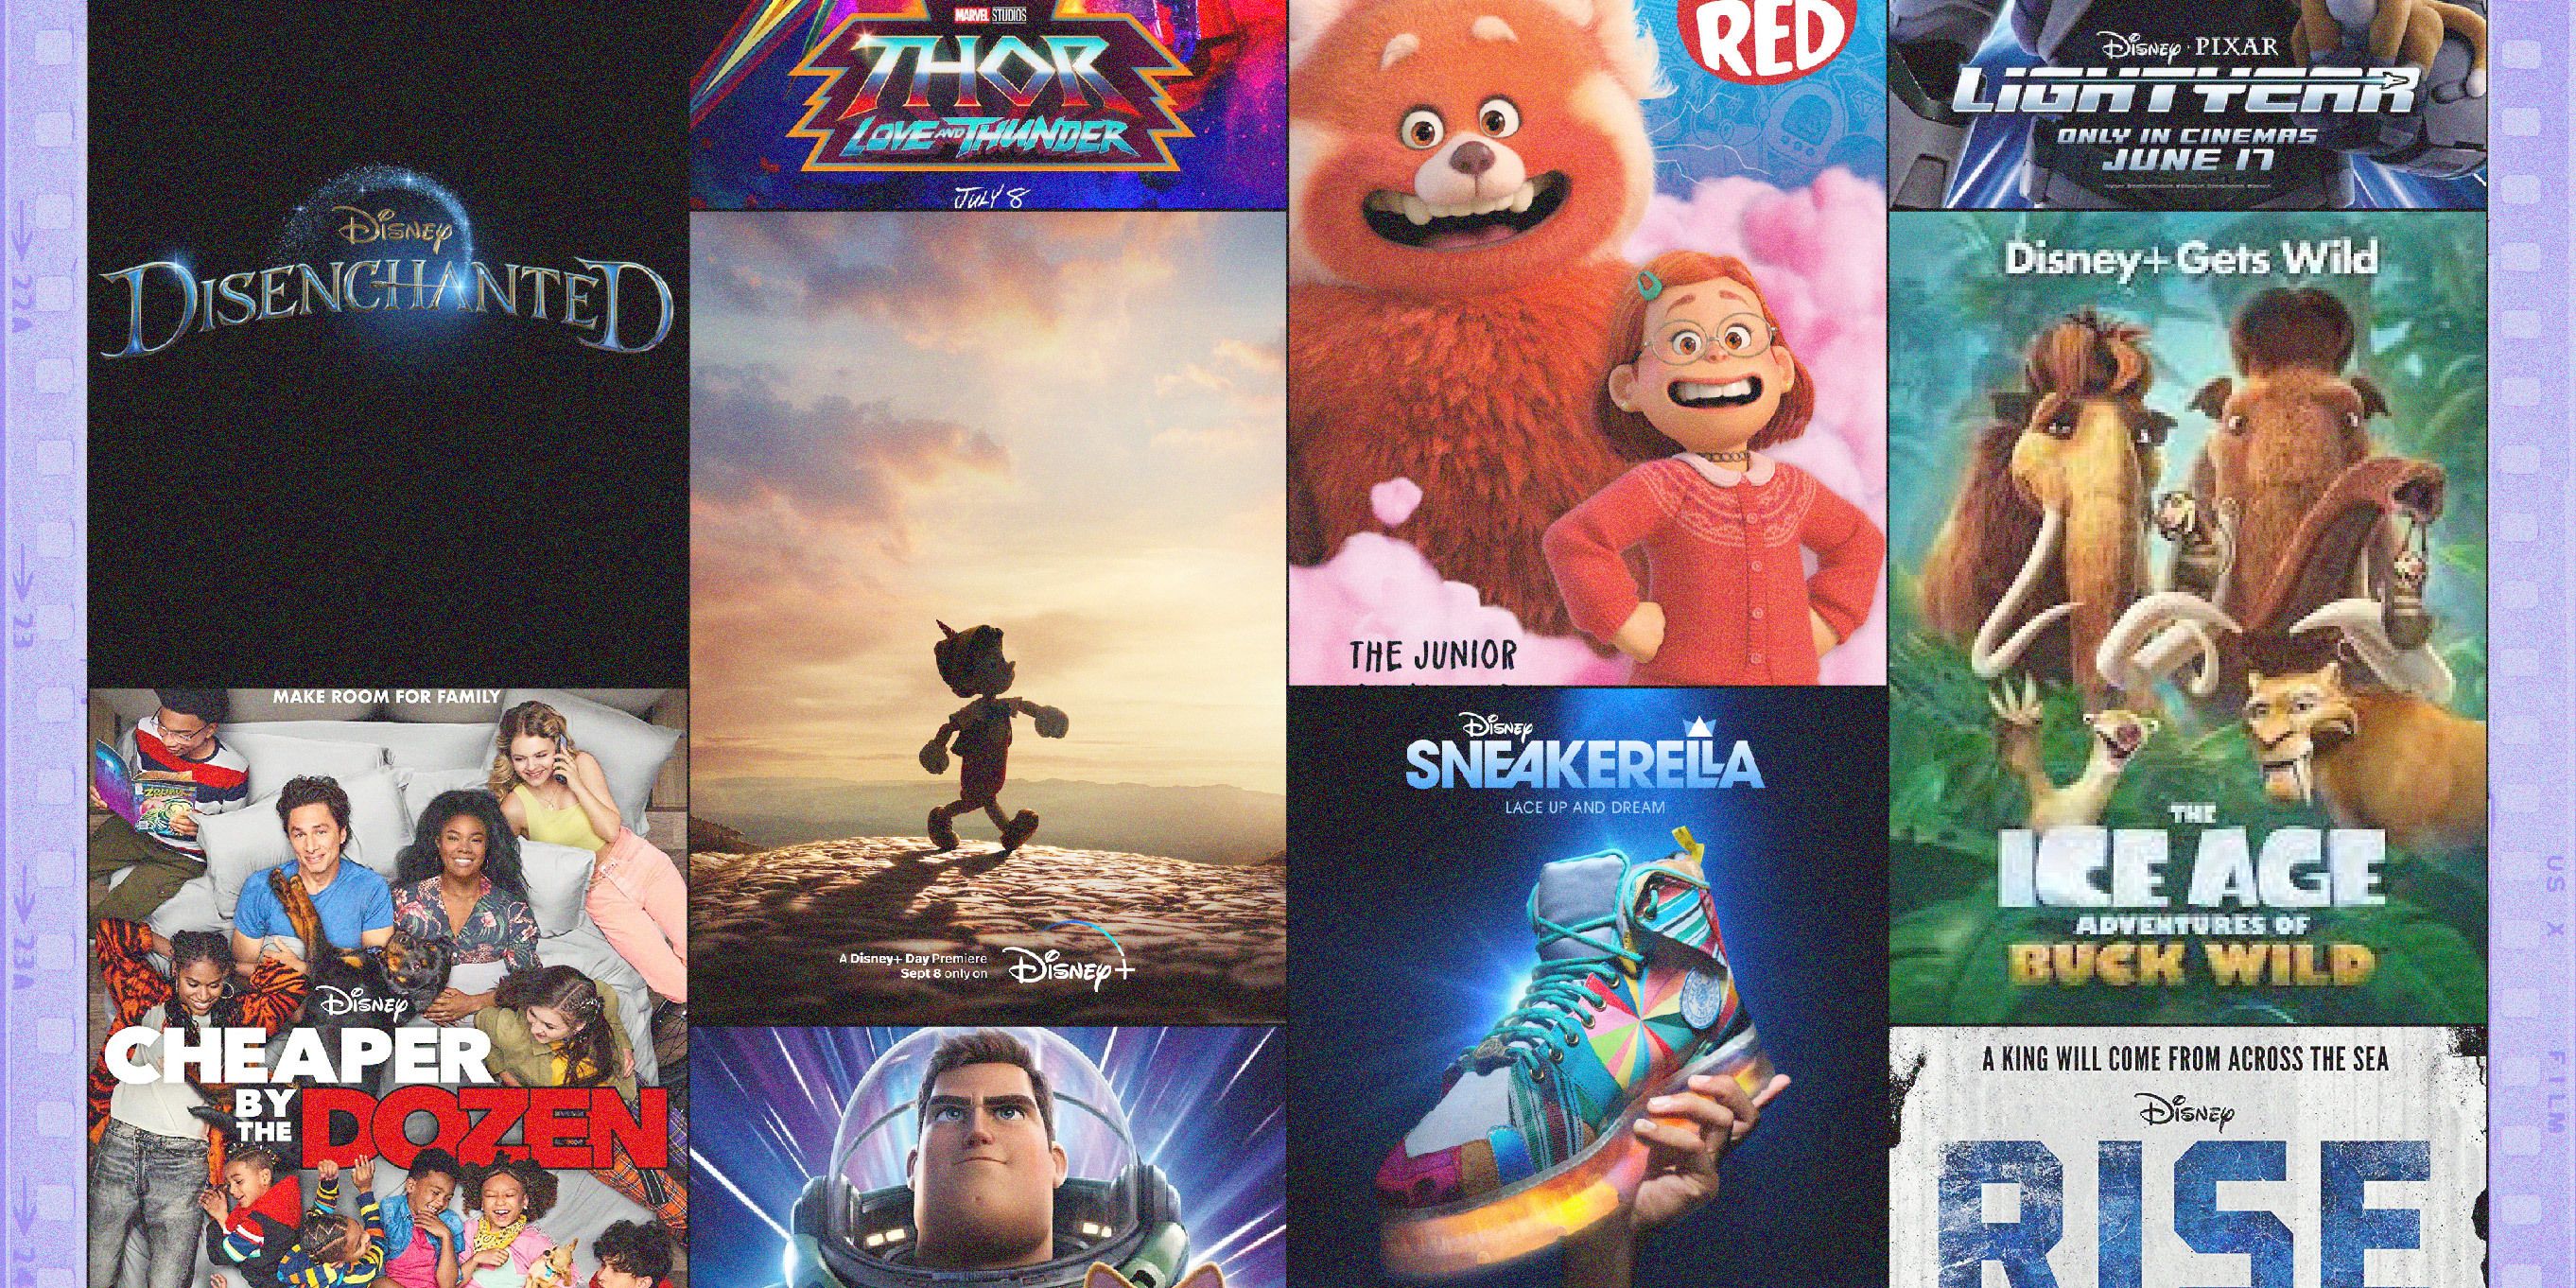 Disney Movies Coming Out in 2022 - New Disney Movies 2022